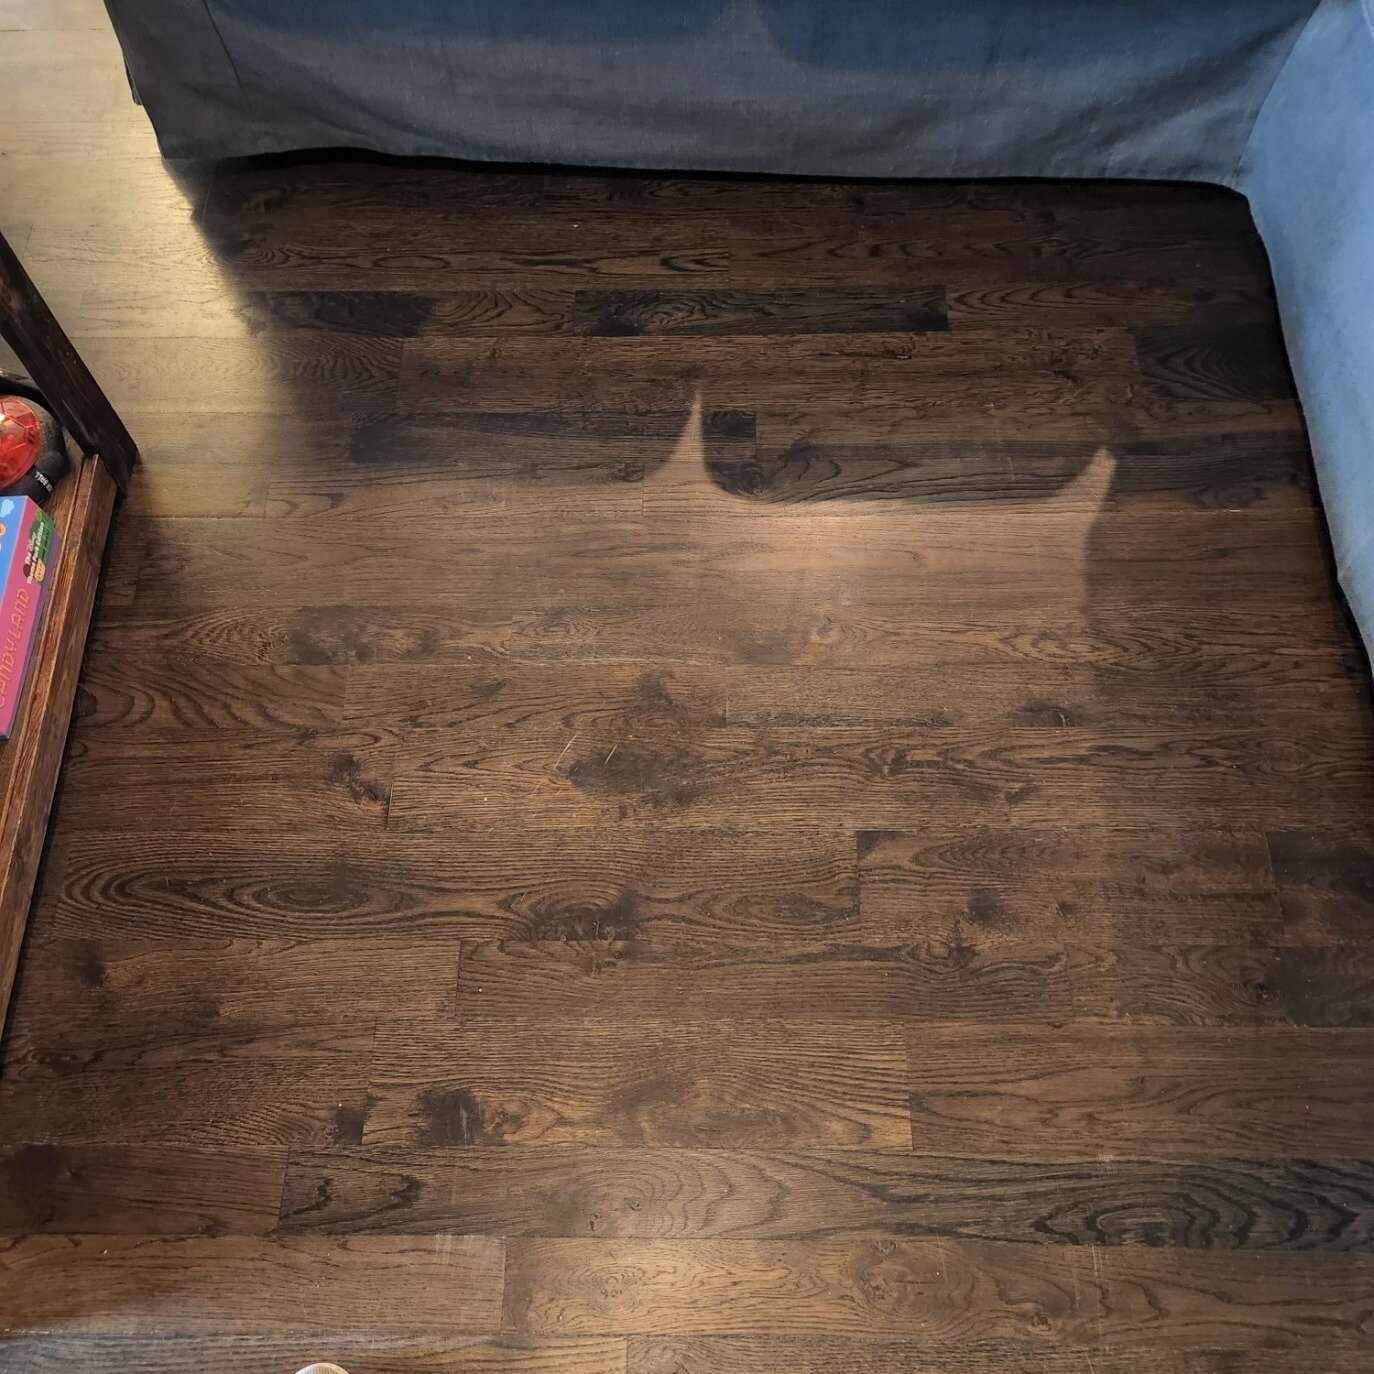 If you&rsquo;ve got kids or dogs or a combination of both, chances are that under your coffee table and couches, this is what you&rsquo;ll find! Just like the rest of your floor, spaces under furniture should be cleaned and beautiful. 

What&rsquo;s 